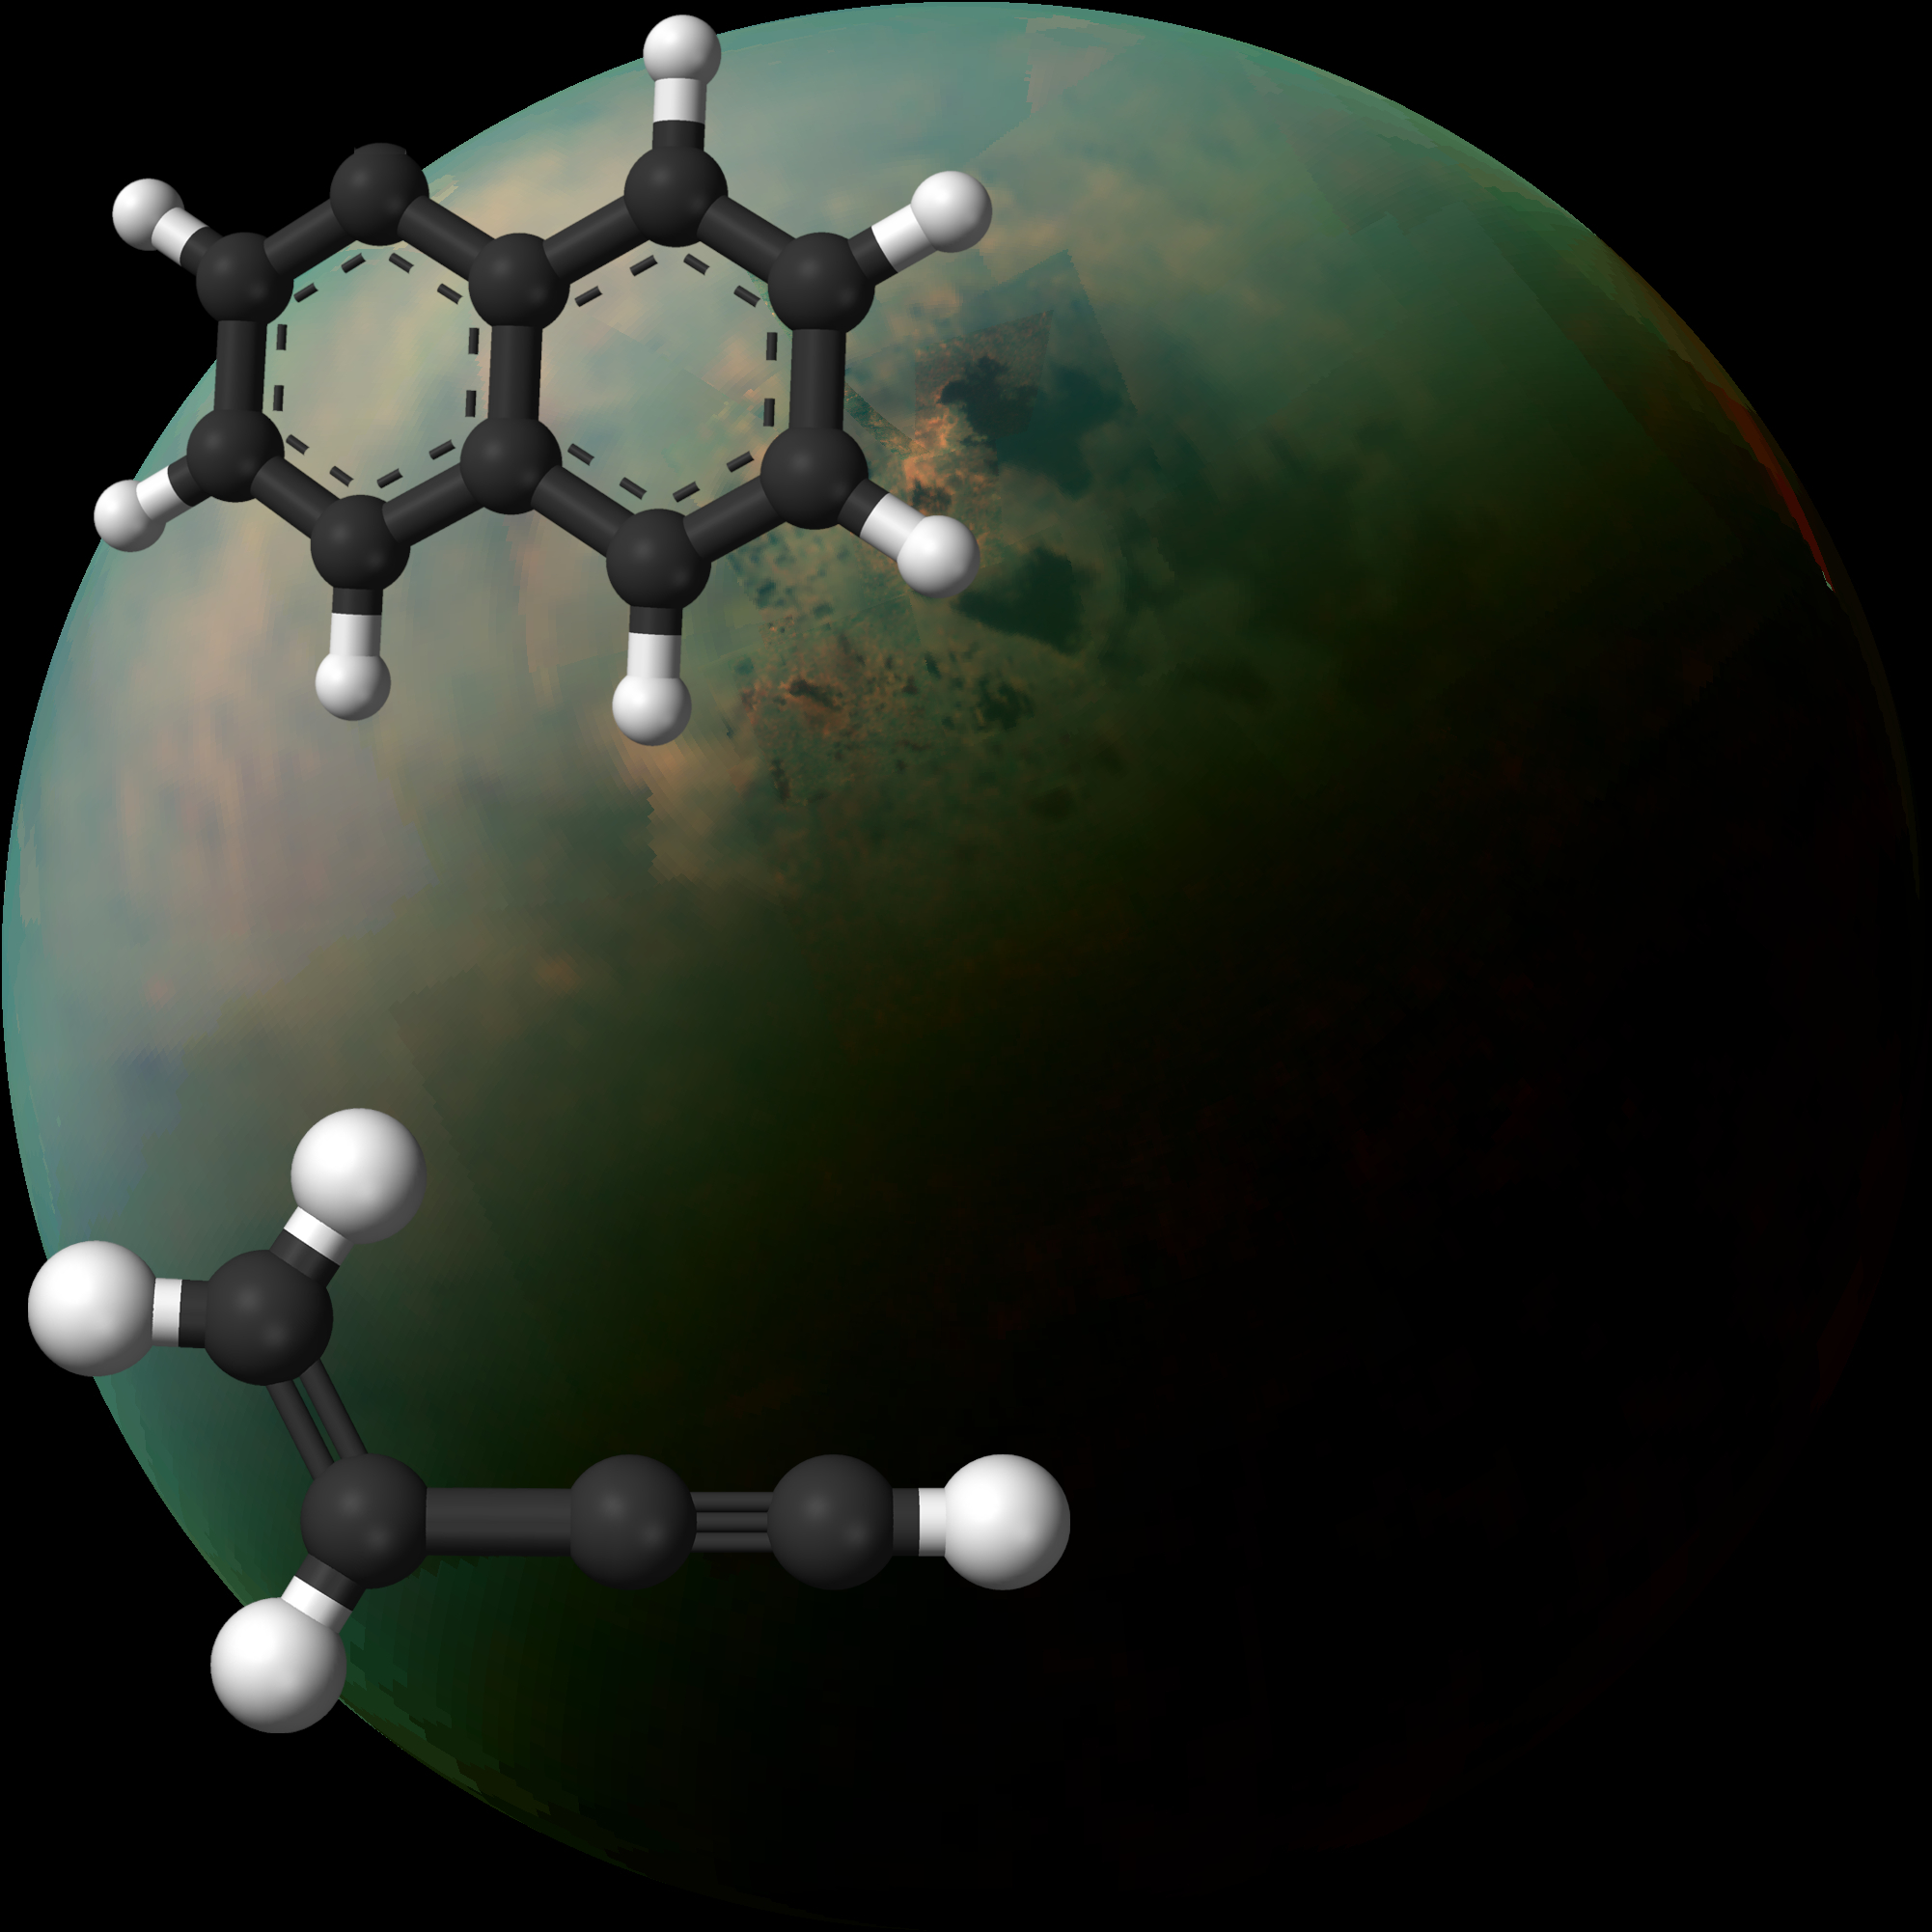 Image - Scientists have explored the chemistry at work when combining two gases: one composed of two-ring molecular structure known as a naphthyl radicals (upper left), and the other composed of a hydrocarbon called vinylacetylene (lower right). Behind these 3-D molecular representations is an image of Saturn's moon Titan, taken by NASA's Cassini spacecraft. (Credits: Wikimedia Commons, NASA, Jet Propulsion Laboratory, Caltech, Space Science Institute, John Hopkins University Applied Physics Laboratory, University of Arizona)